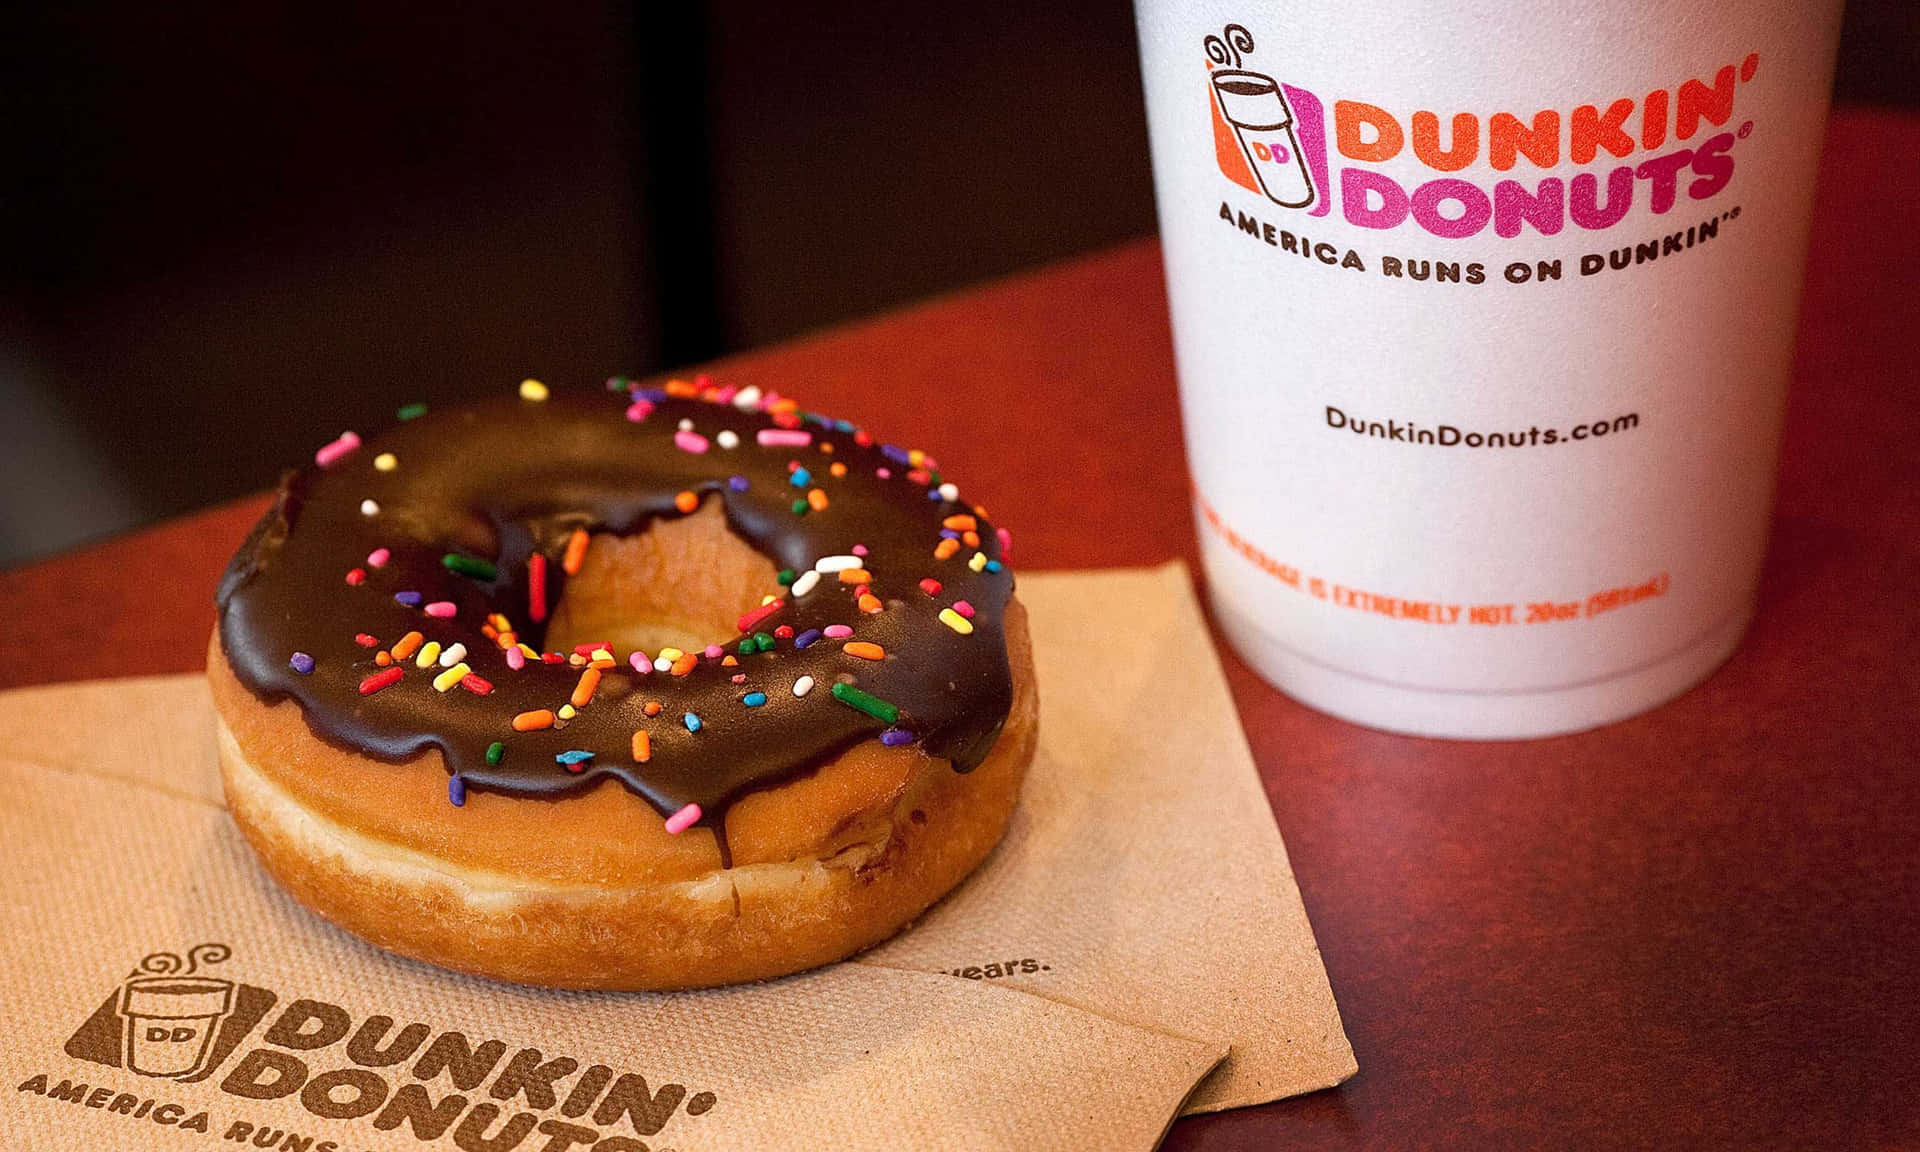 Enjoy a Delicious and Refreshing Dunkin Donuts beverage!